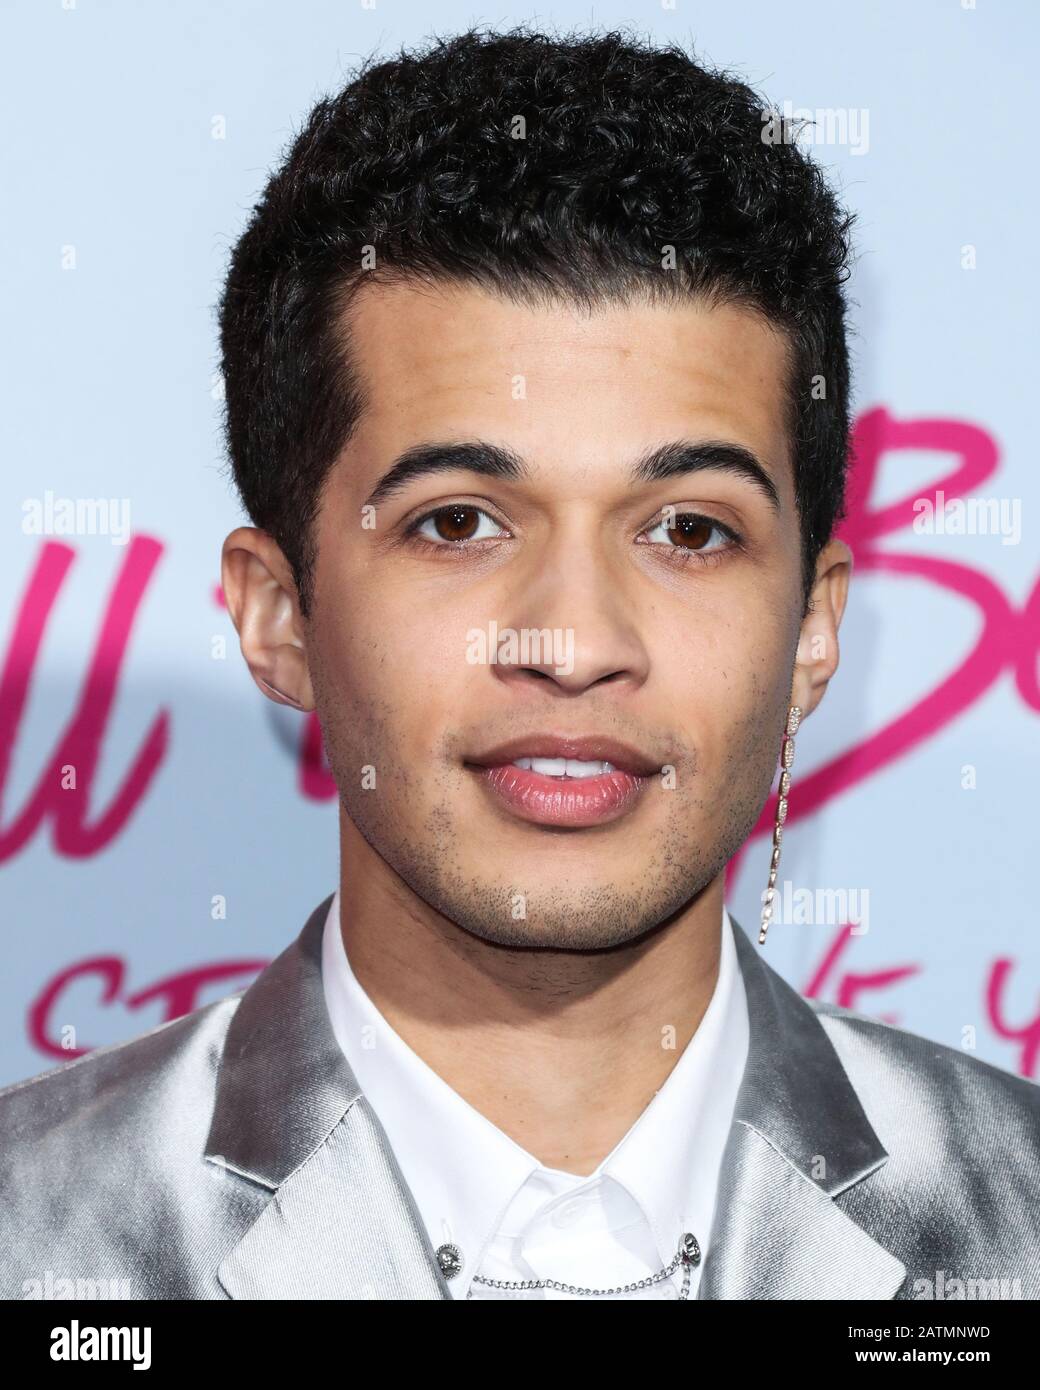 HOLLYWOOD, LOS ANGELES, CALIFORNIA, USA - FEBRUARY 03: Actor Jordan Fisher  arrives at the Los Angeles Premiere Of Netflix's 'To All The Boys: P.S. I  Still Love You' held at the Egyptian